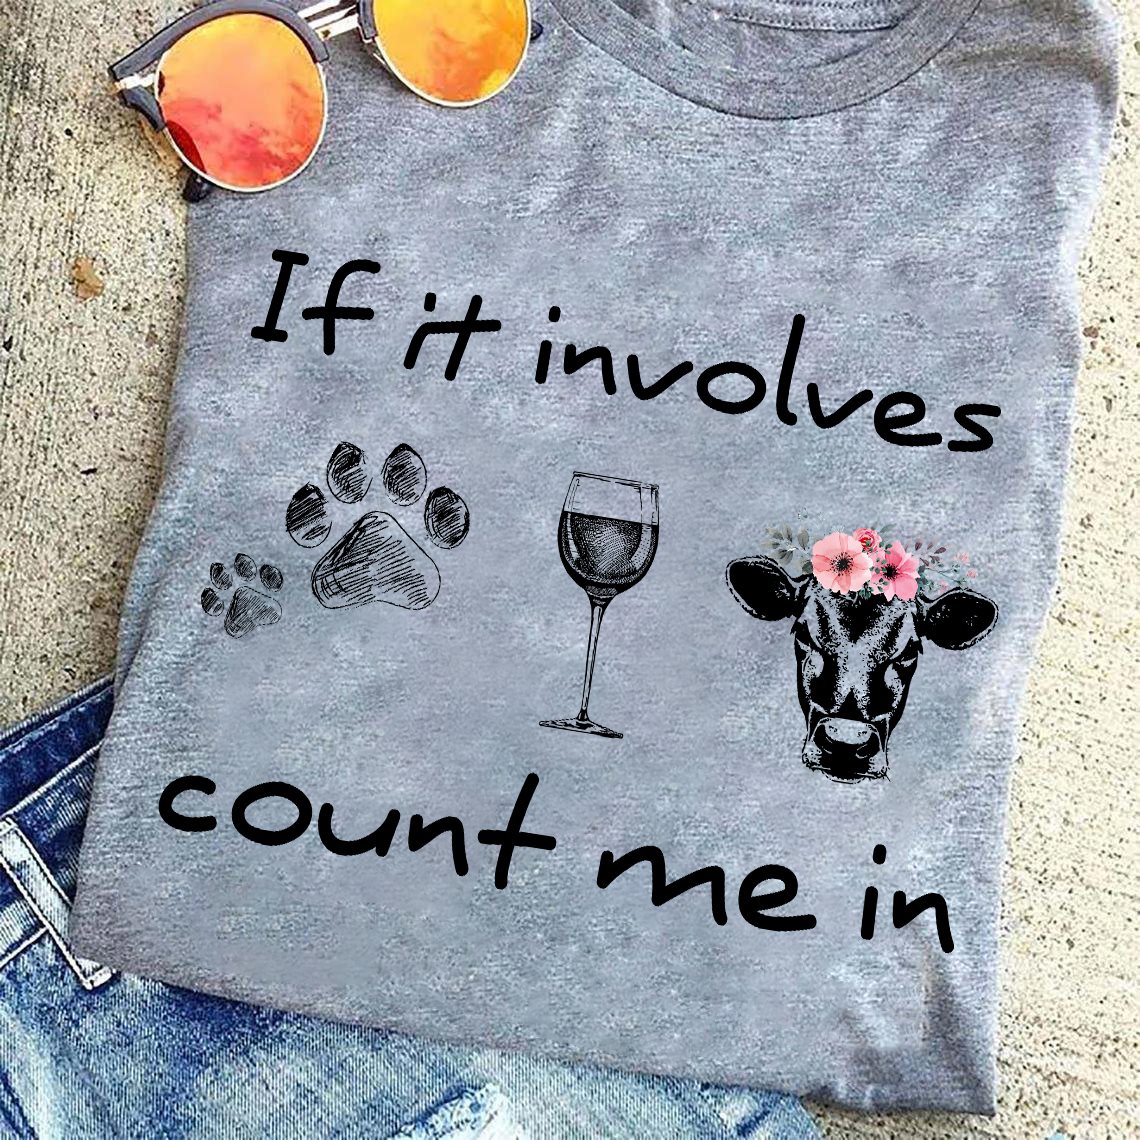 If it involves count me in - Dog lover, wine and cow